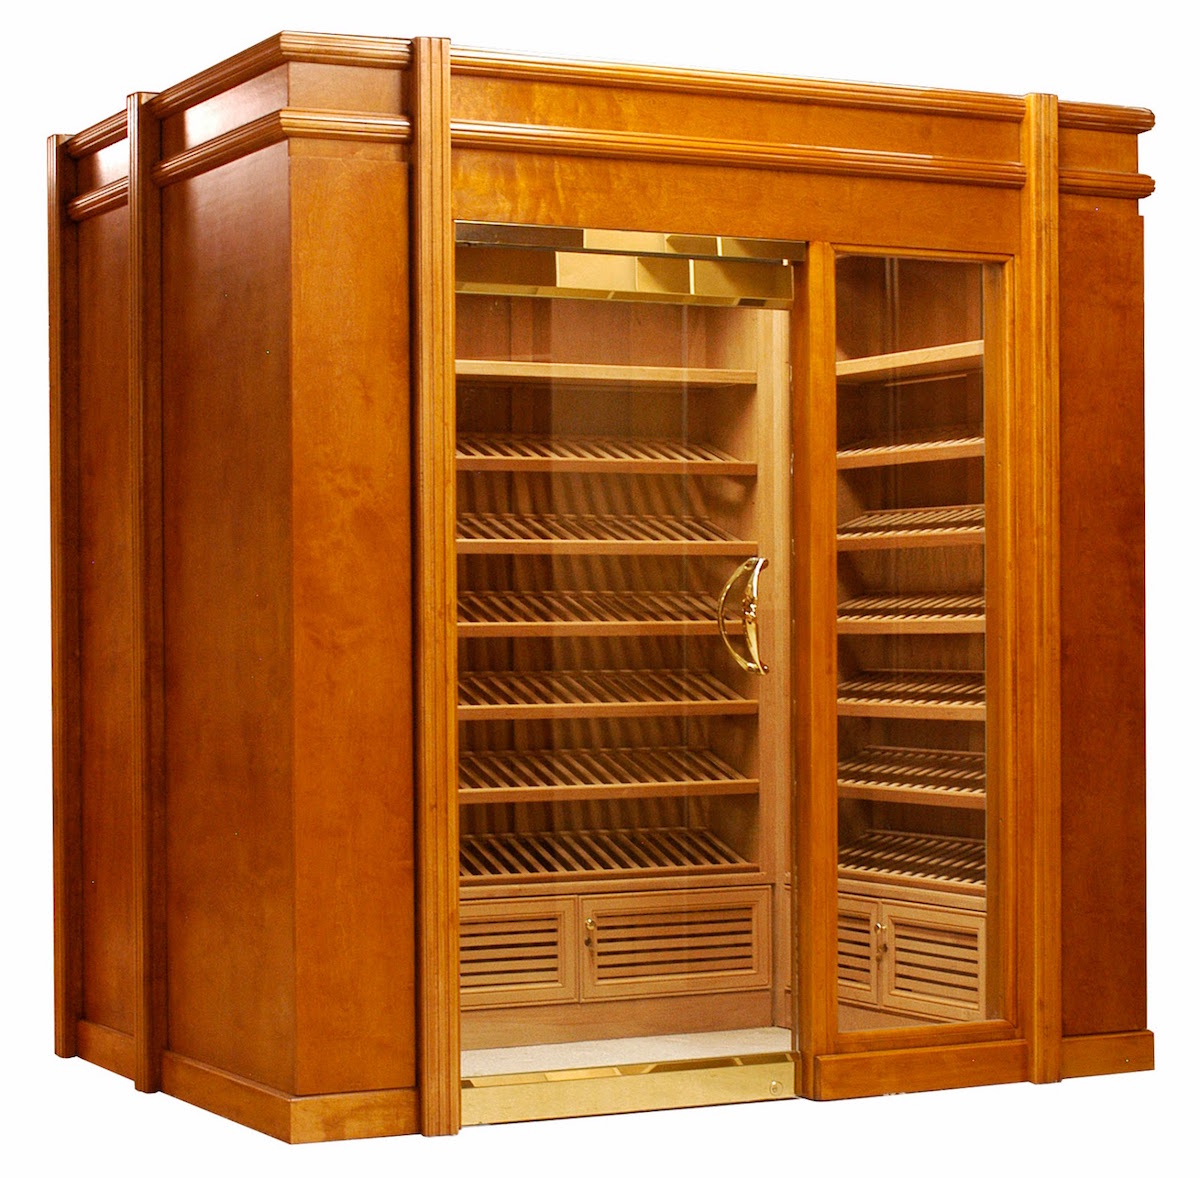 The Humidor Store’s Walk-In Humidor The Best Cigar Humidor for Your Collection